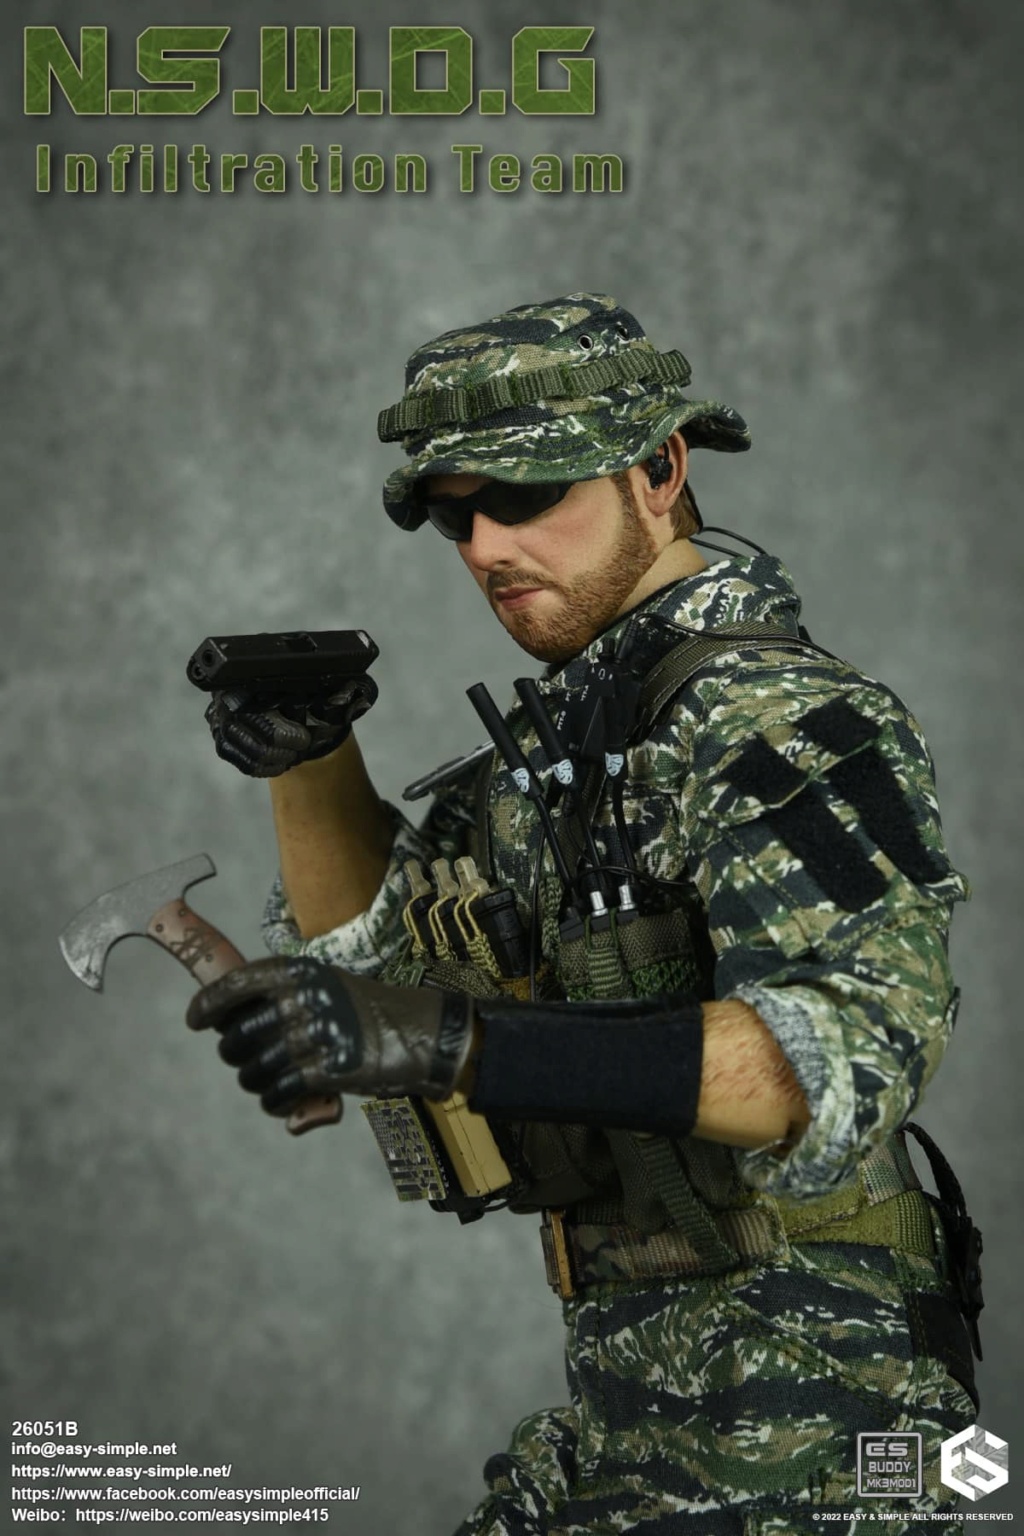 ModernMilitary - NEW PRODUCT: EASY AND SIMPLE 1/6 SCALE FIGURE: N.S.W.D.G INFILTRATION TEAM - (2 Versions) 11857